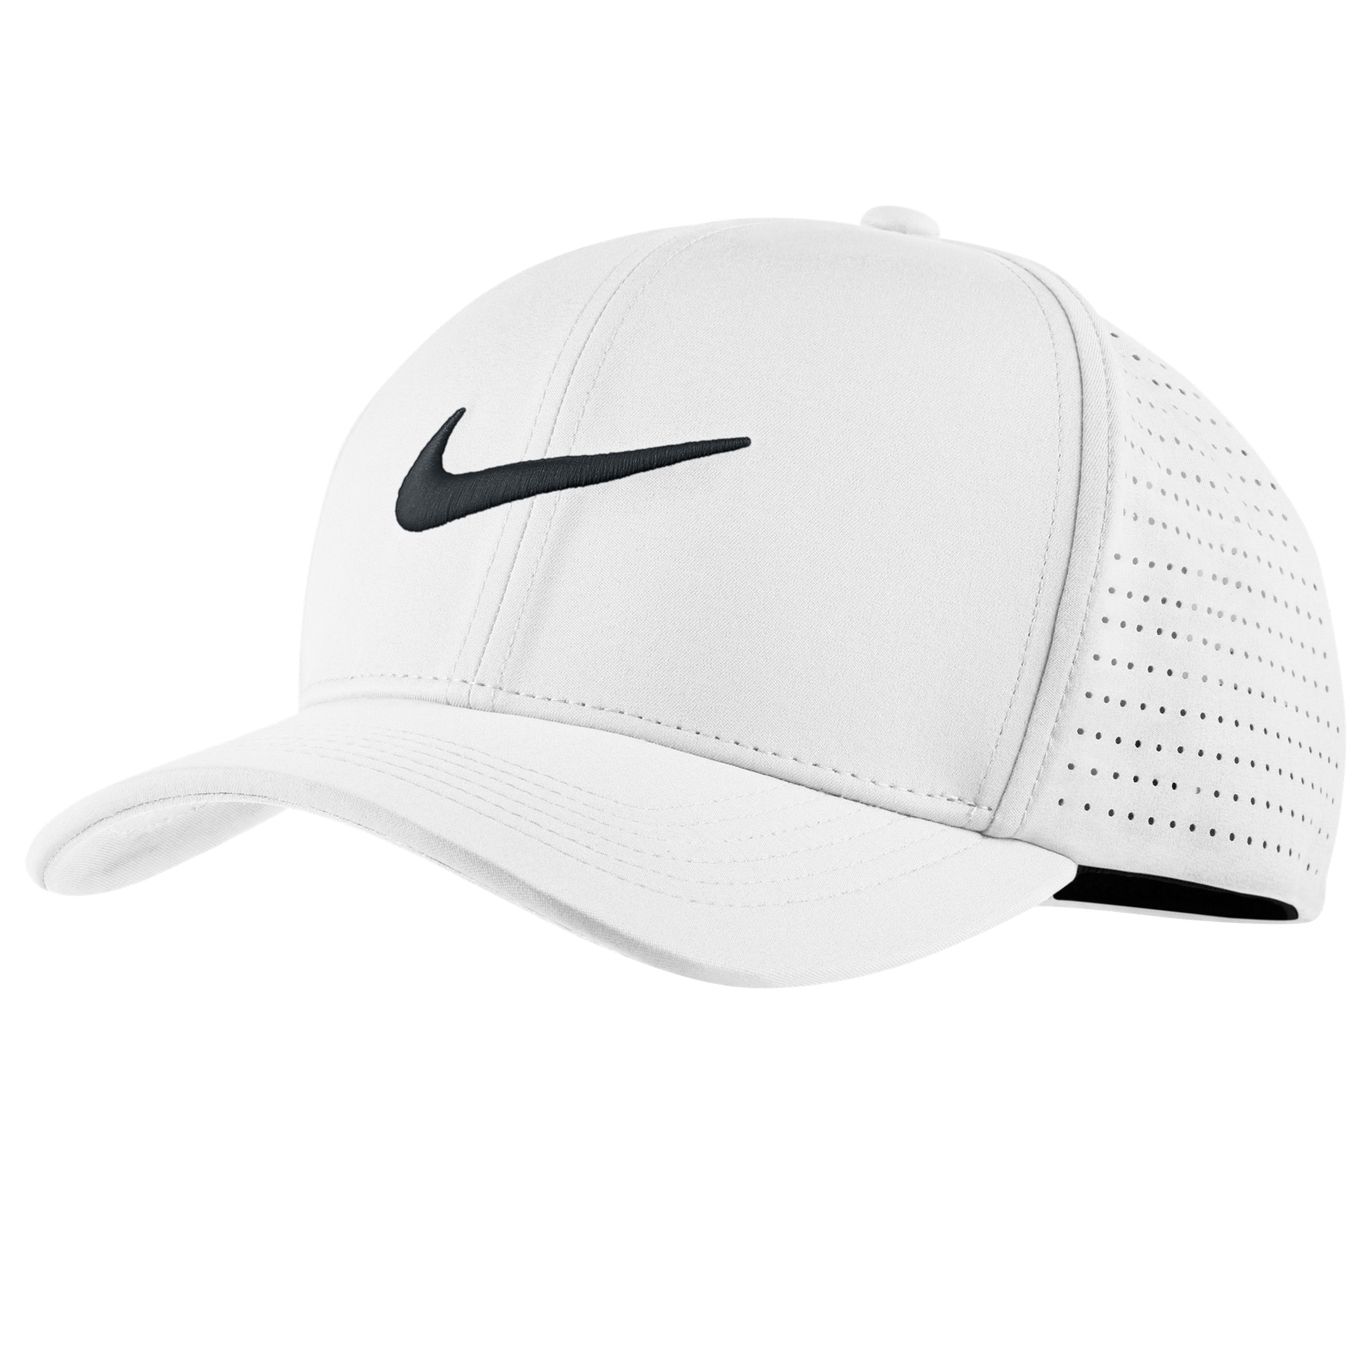 Nike AeroBill Classic 99 Fitted Golf Hat in White.jpg